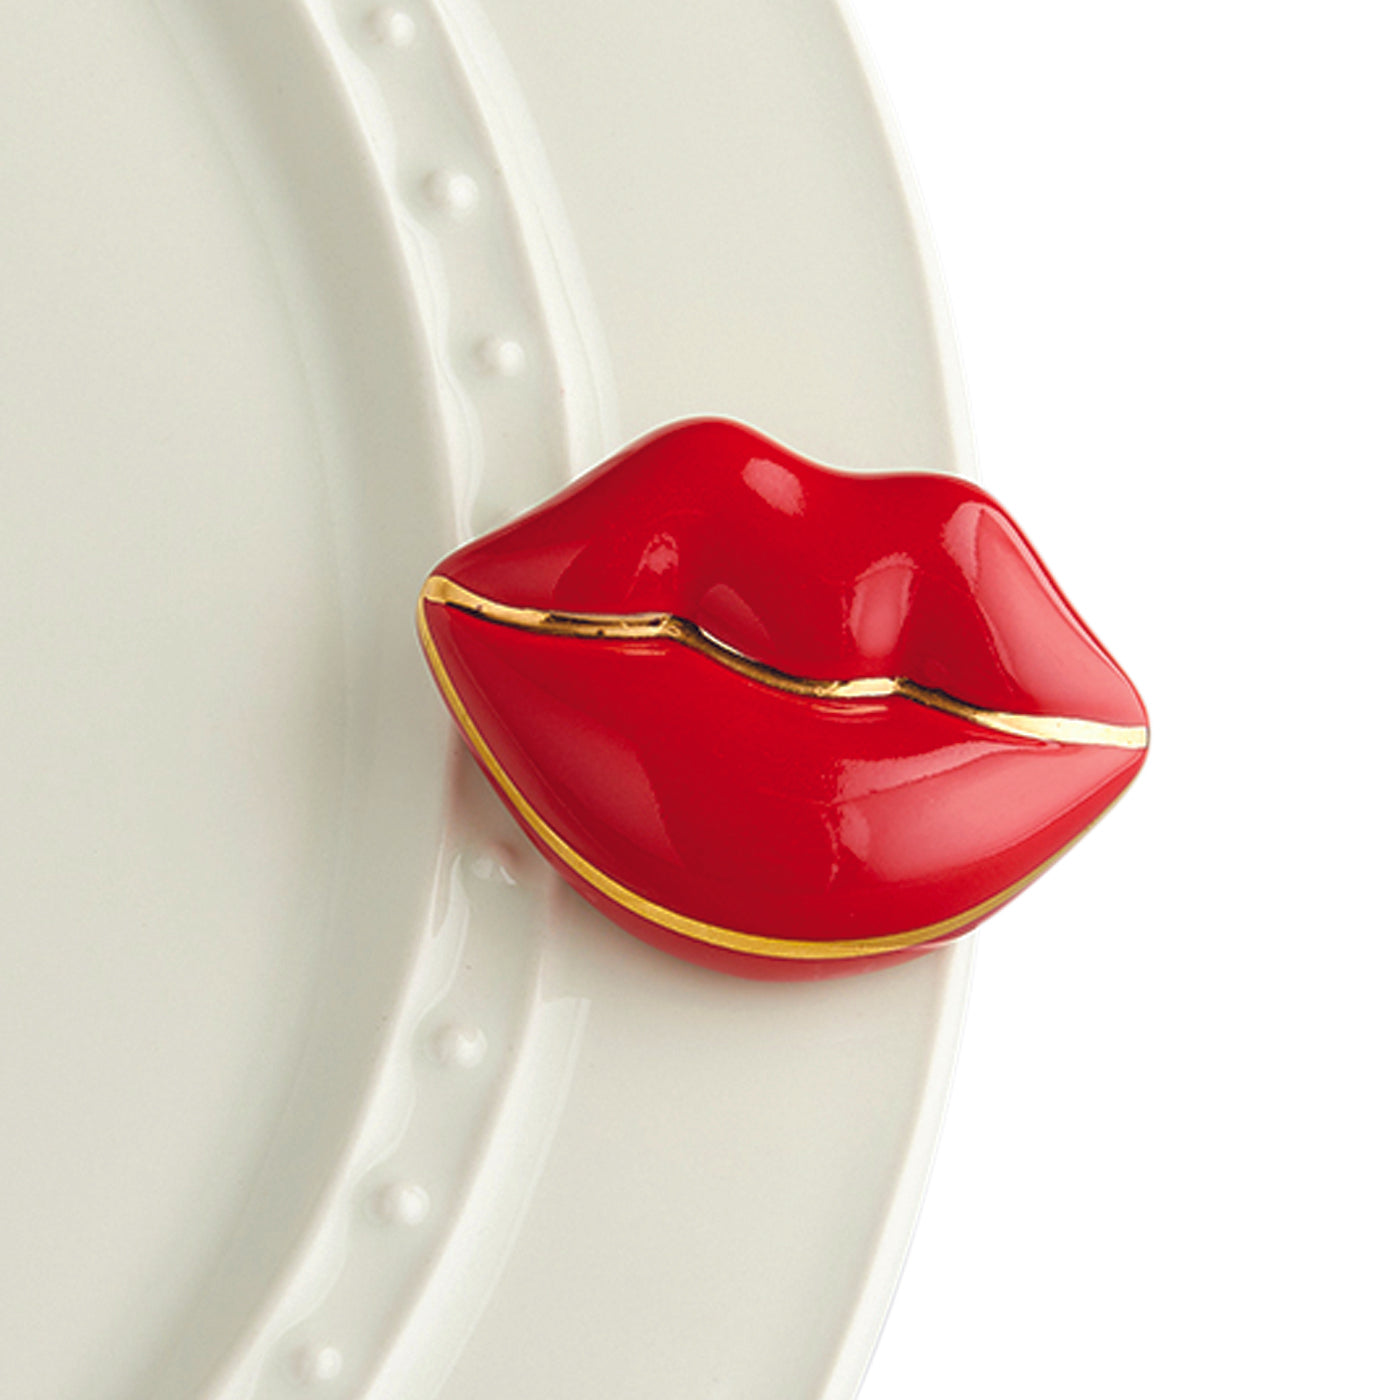 A249 Nora Fleming Smooches mini red lips with gold accents at The Painted Cottage in Edgewater MD. Celebrate Valentine’s Day, an anniversary, or love!